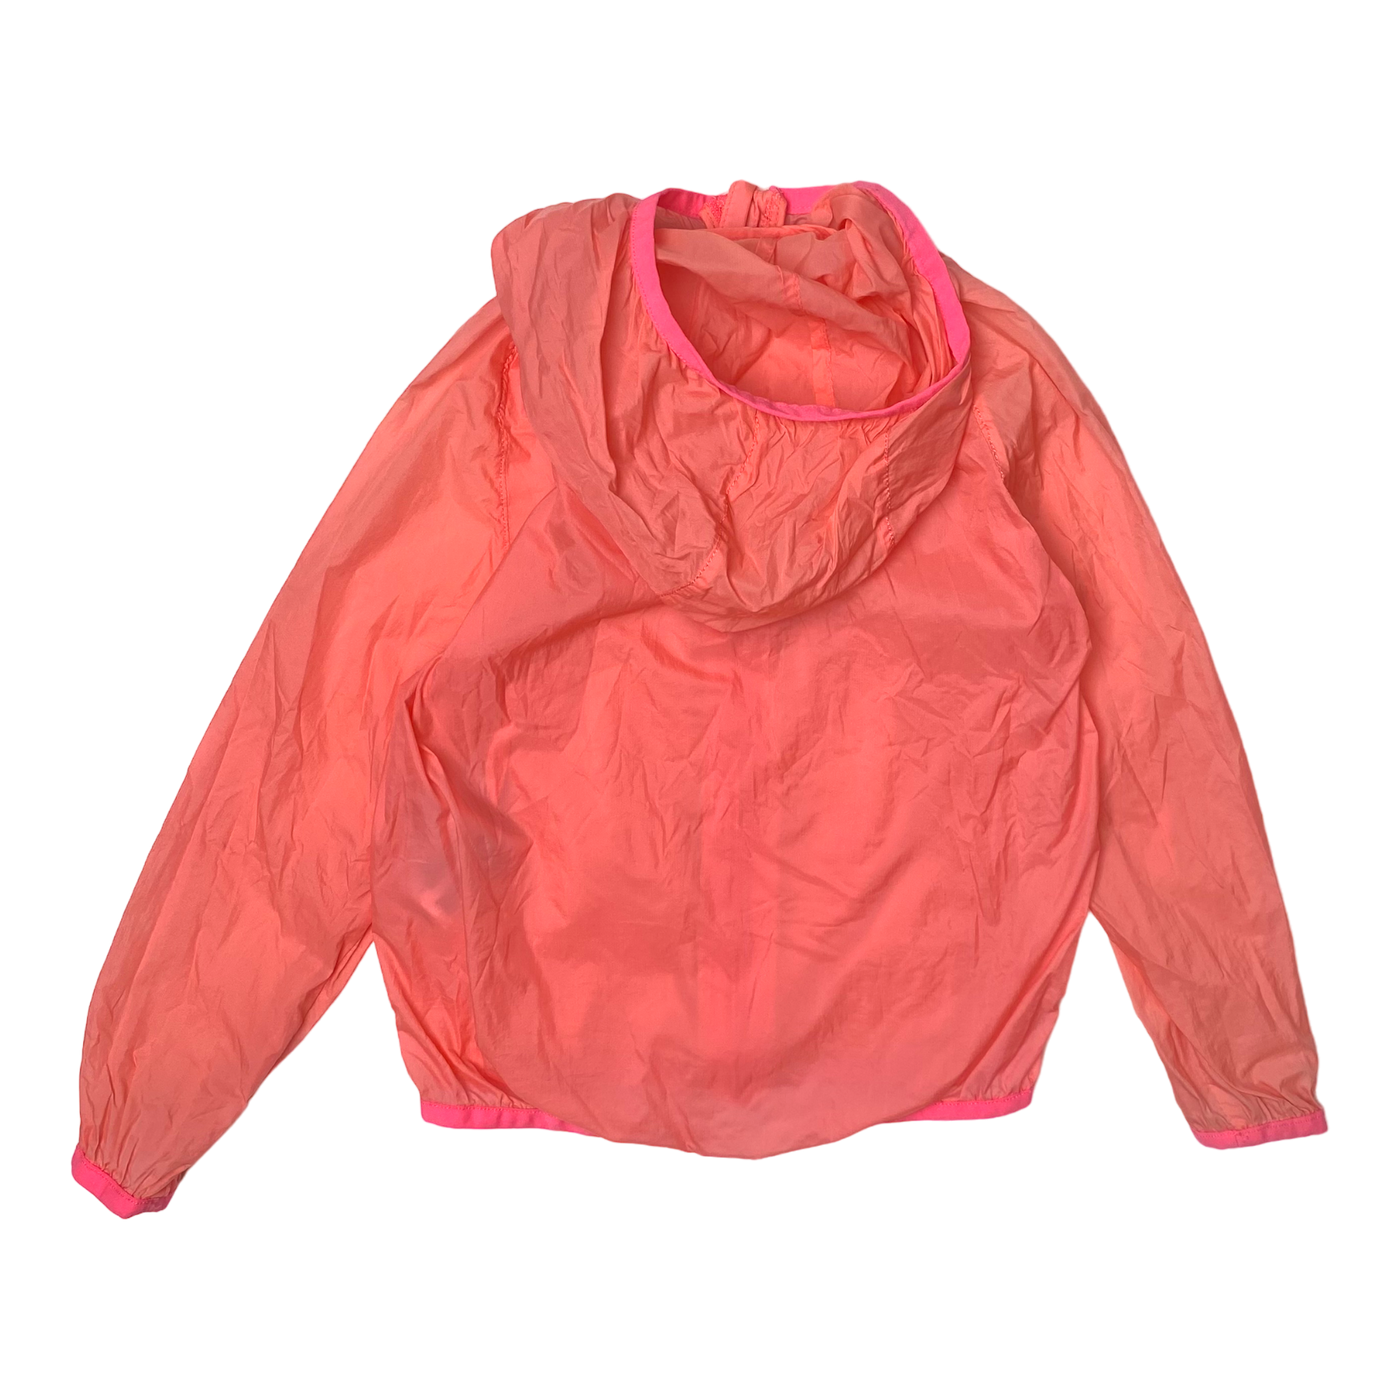 Reima light weight shell jacket, coral pink | 104cm